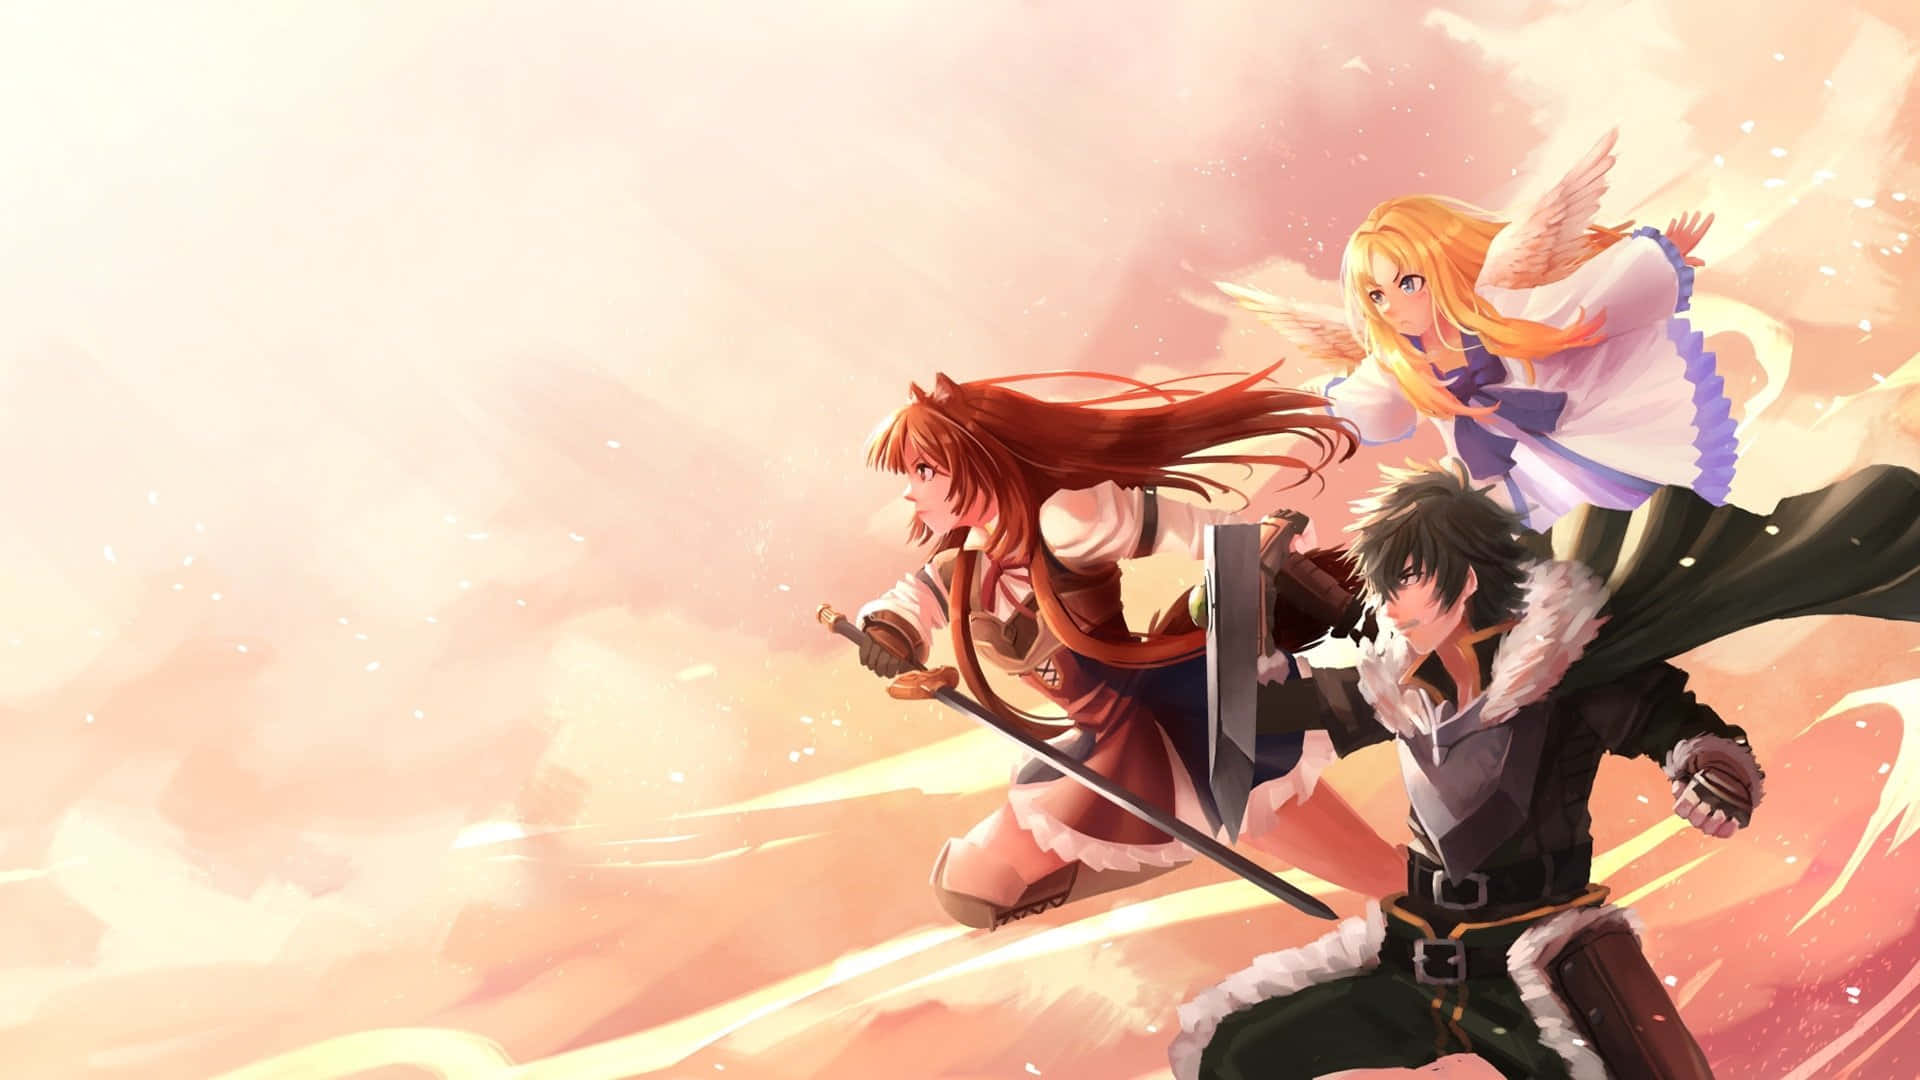 Just another day in the office for the Shield Hero!